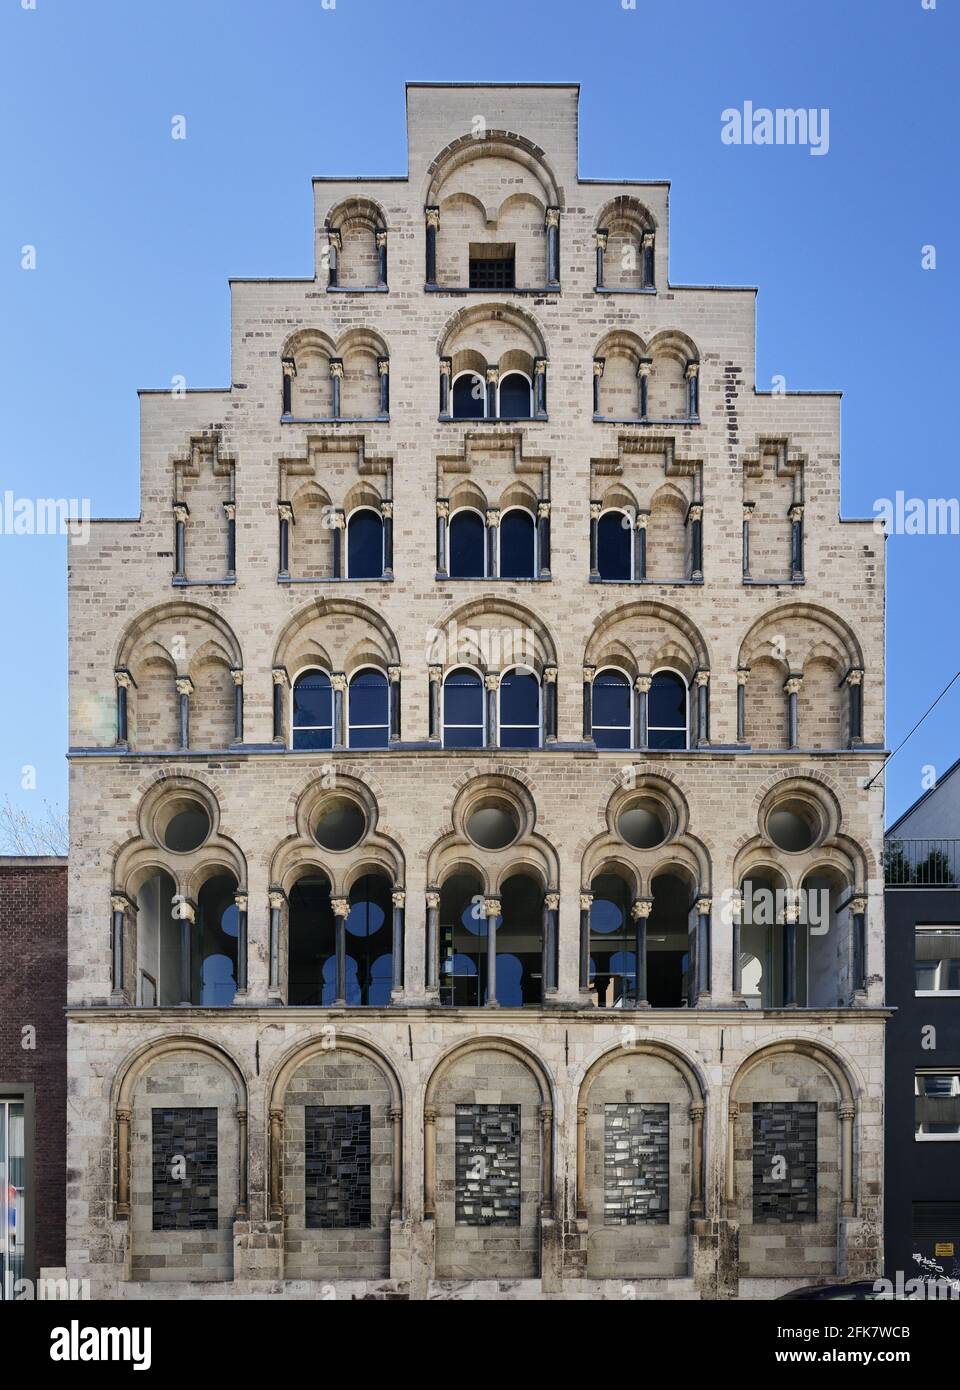 overstolzenhaus, one of the oldest patrician houses from the year 1230 in germany in the old town of cologne Stock Photo